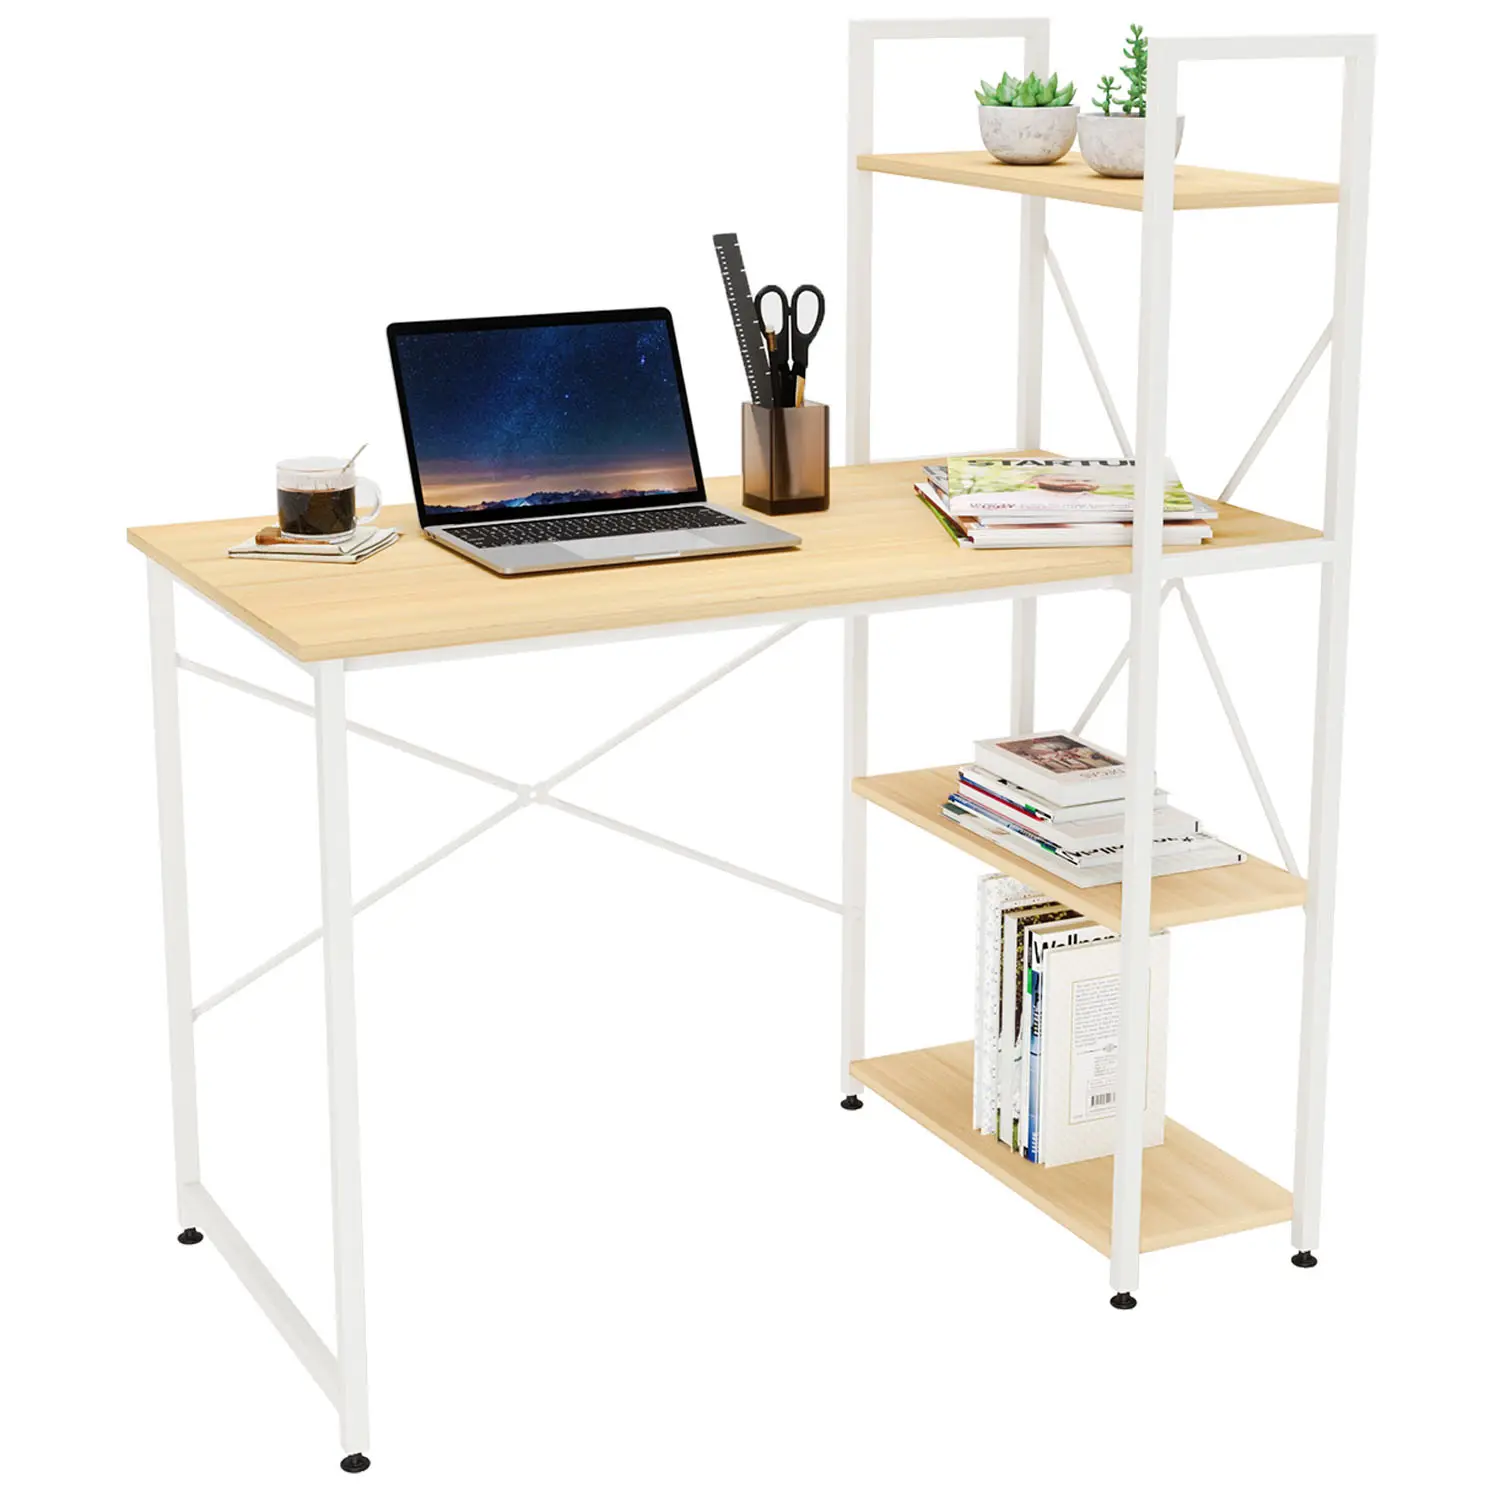 Wooden Professional Computer Furniture Modern height standing office simple computer desk for home office